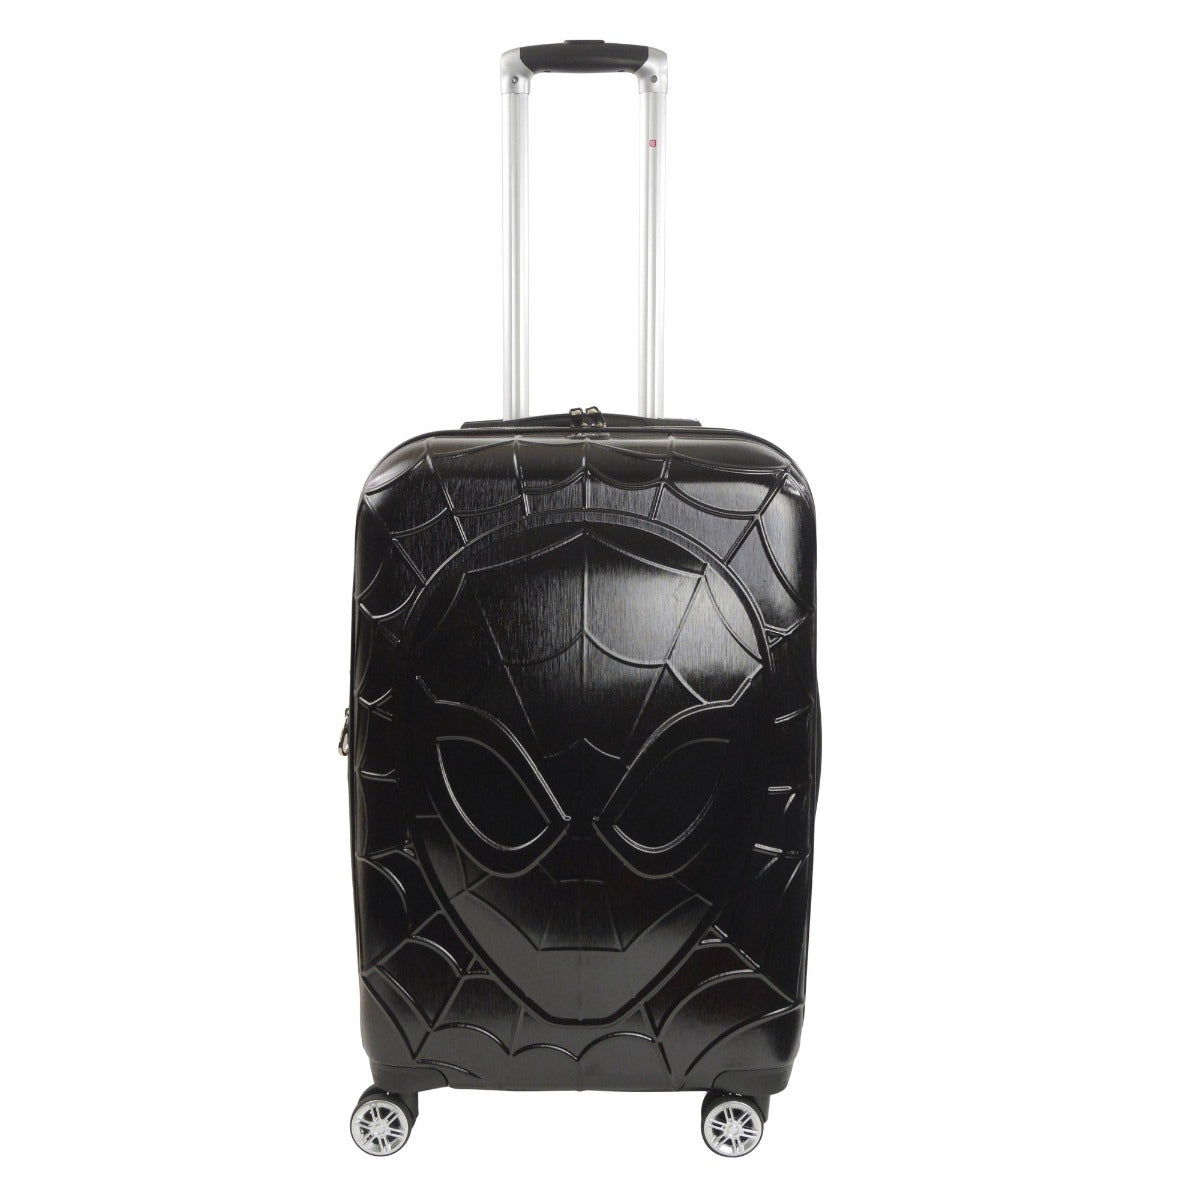 Marvel Spiderman 25" check-in hard-sided spinner suitcase luggage in black